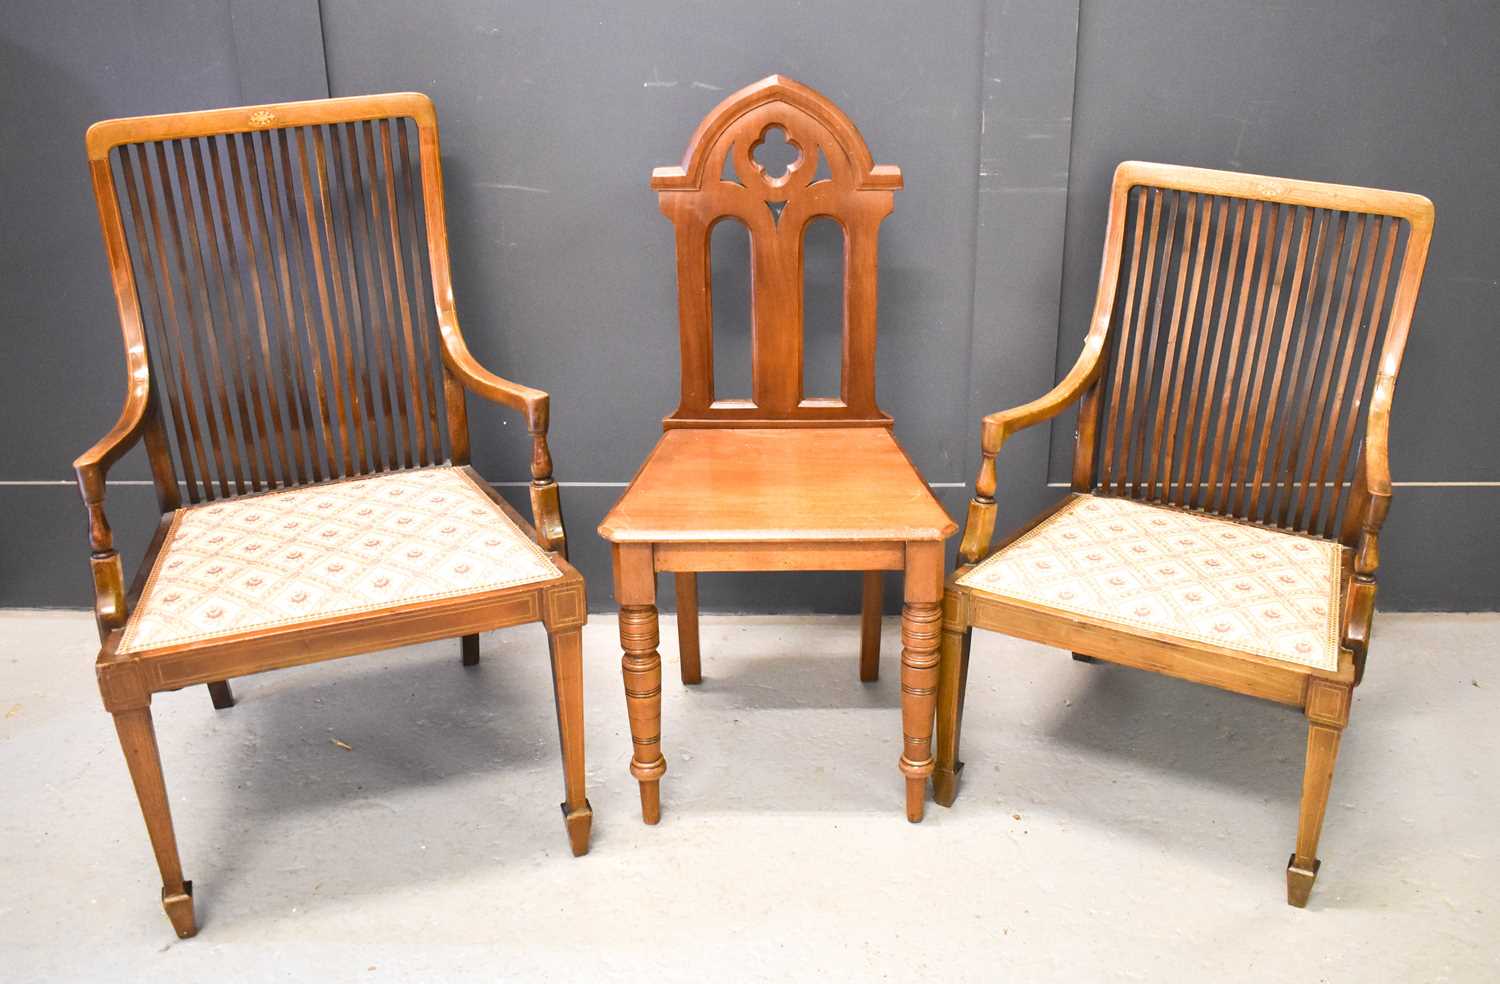 A 19th century mahogany hall chair with shaped back, together with two Edwardian comb backed